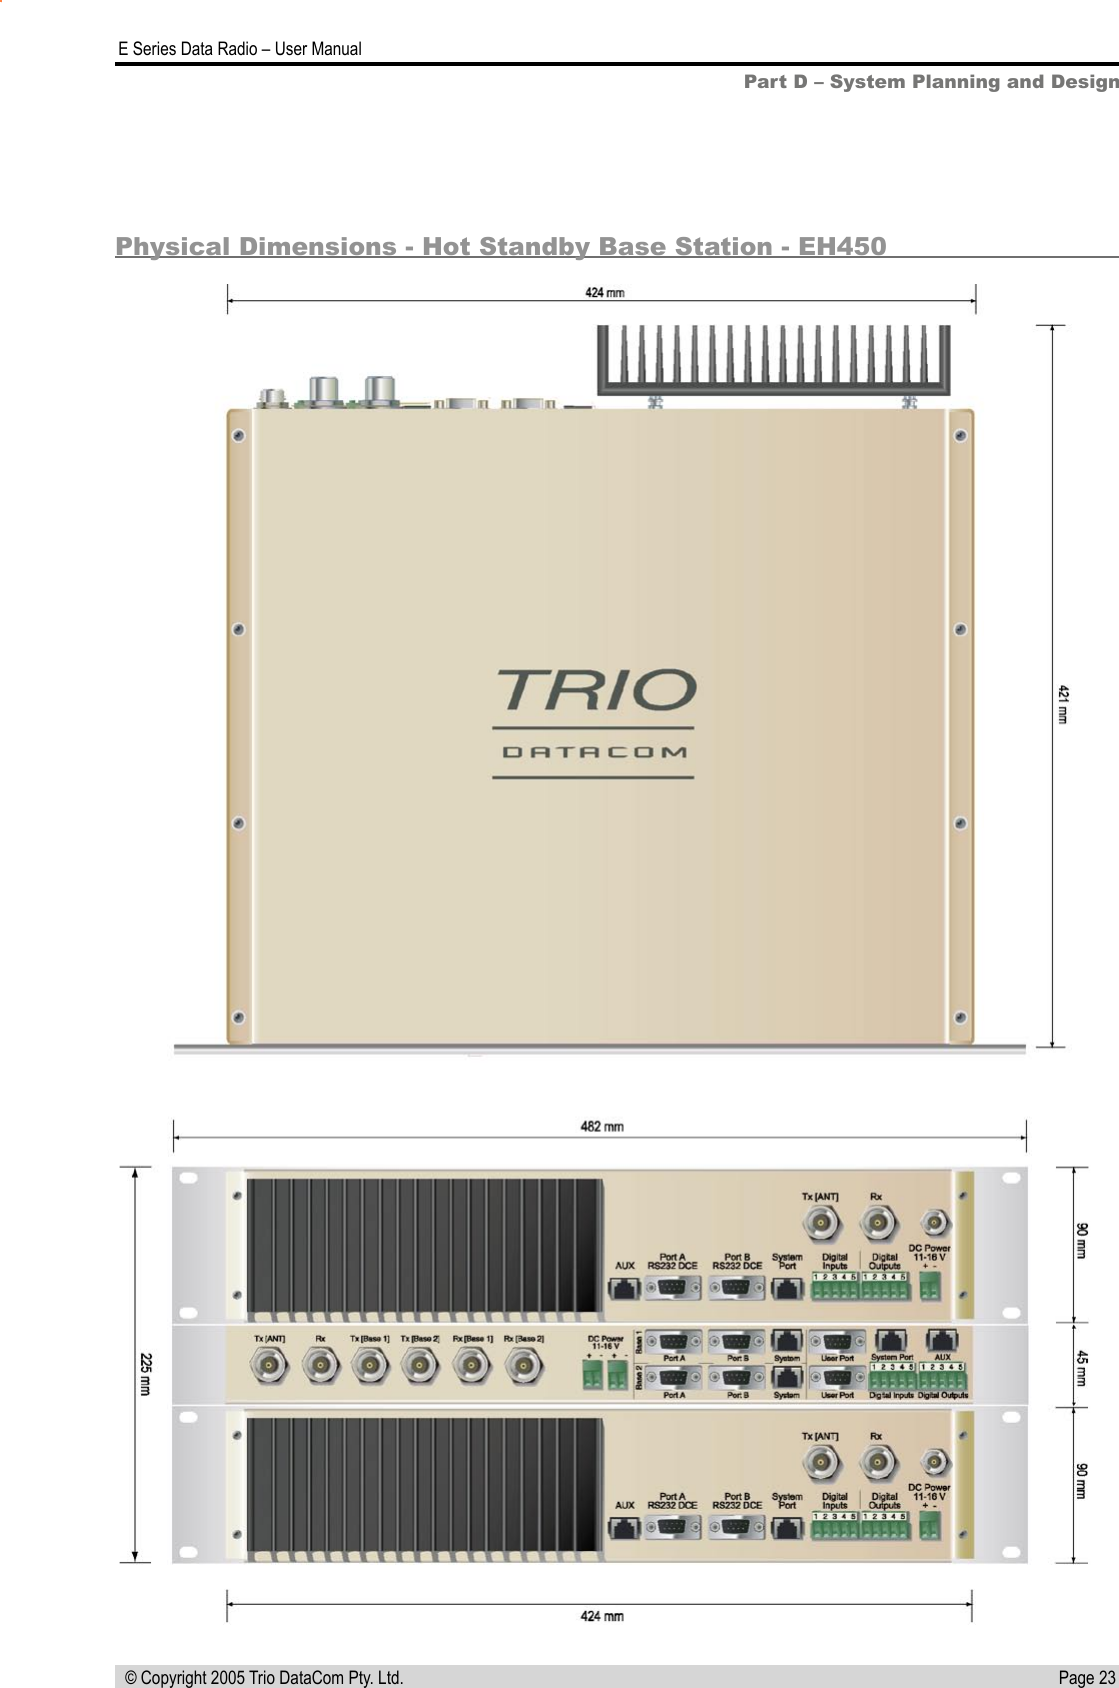 Page 23  E Series Data Radio – User Manual © Copyright 2005 Trio DataCom Pty. Ltd.Physical Dimensions - Hot Standby Base Station - EH450Part D – System Planning and Design